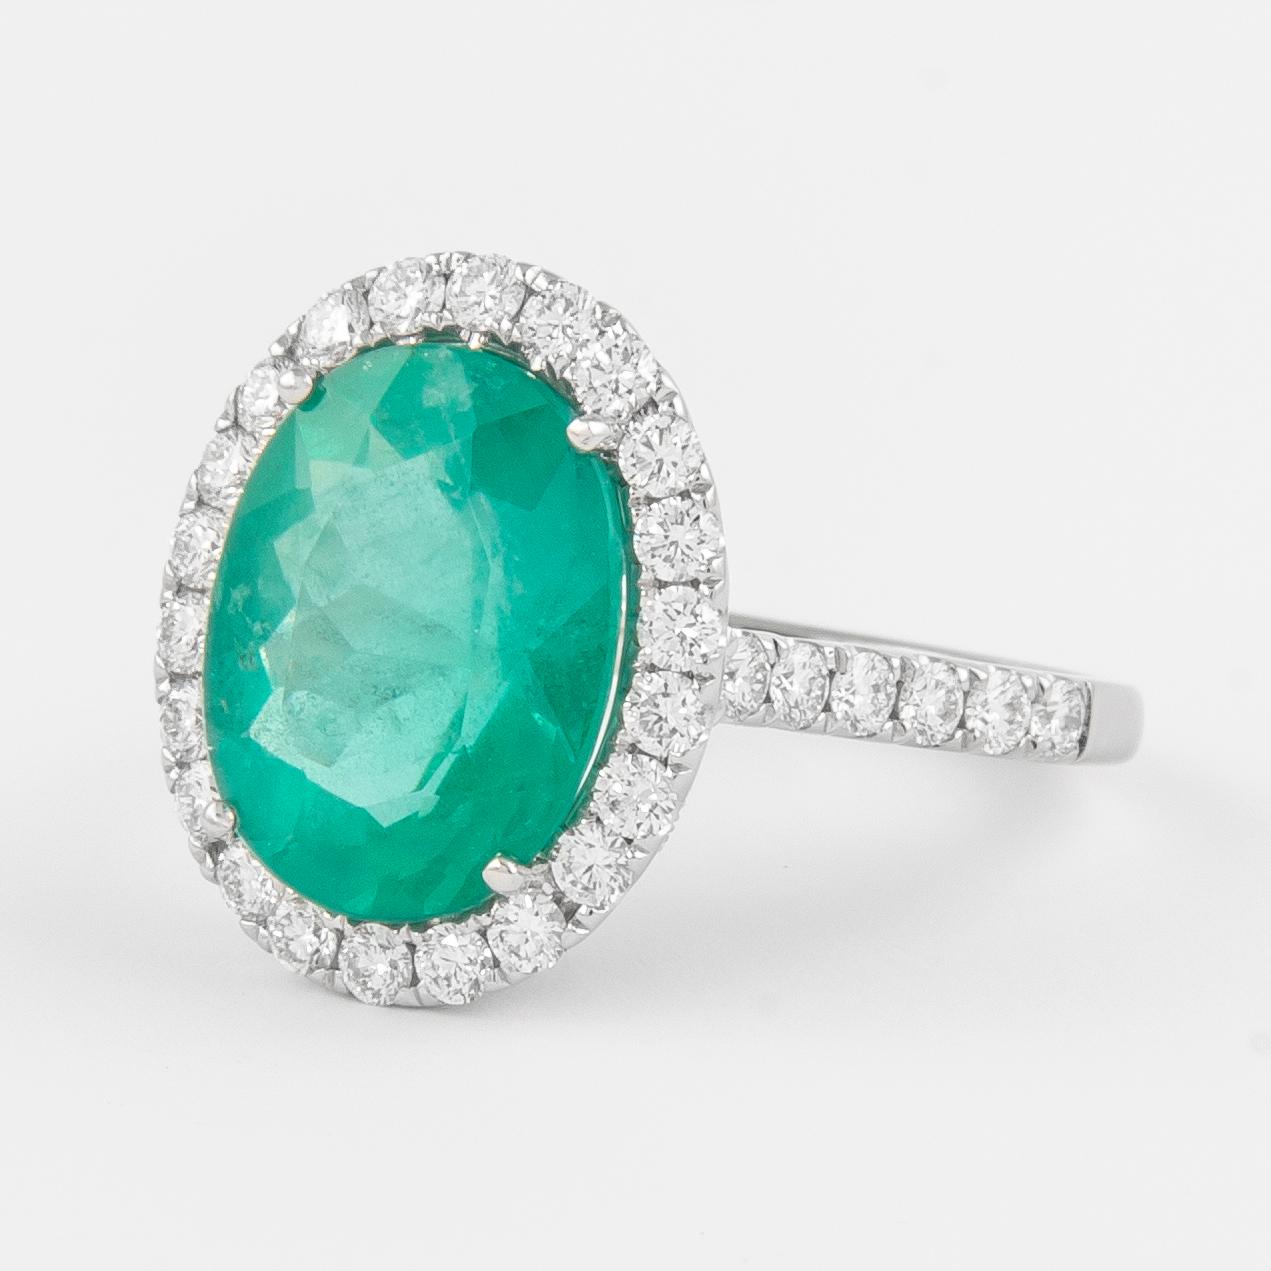 Oval Cut GIA 4.99 Carat Oval Shape Emerald and Diamond Rings 18k Gold